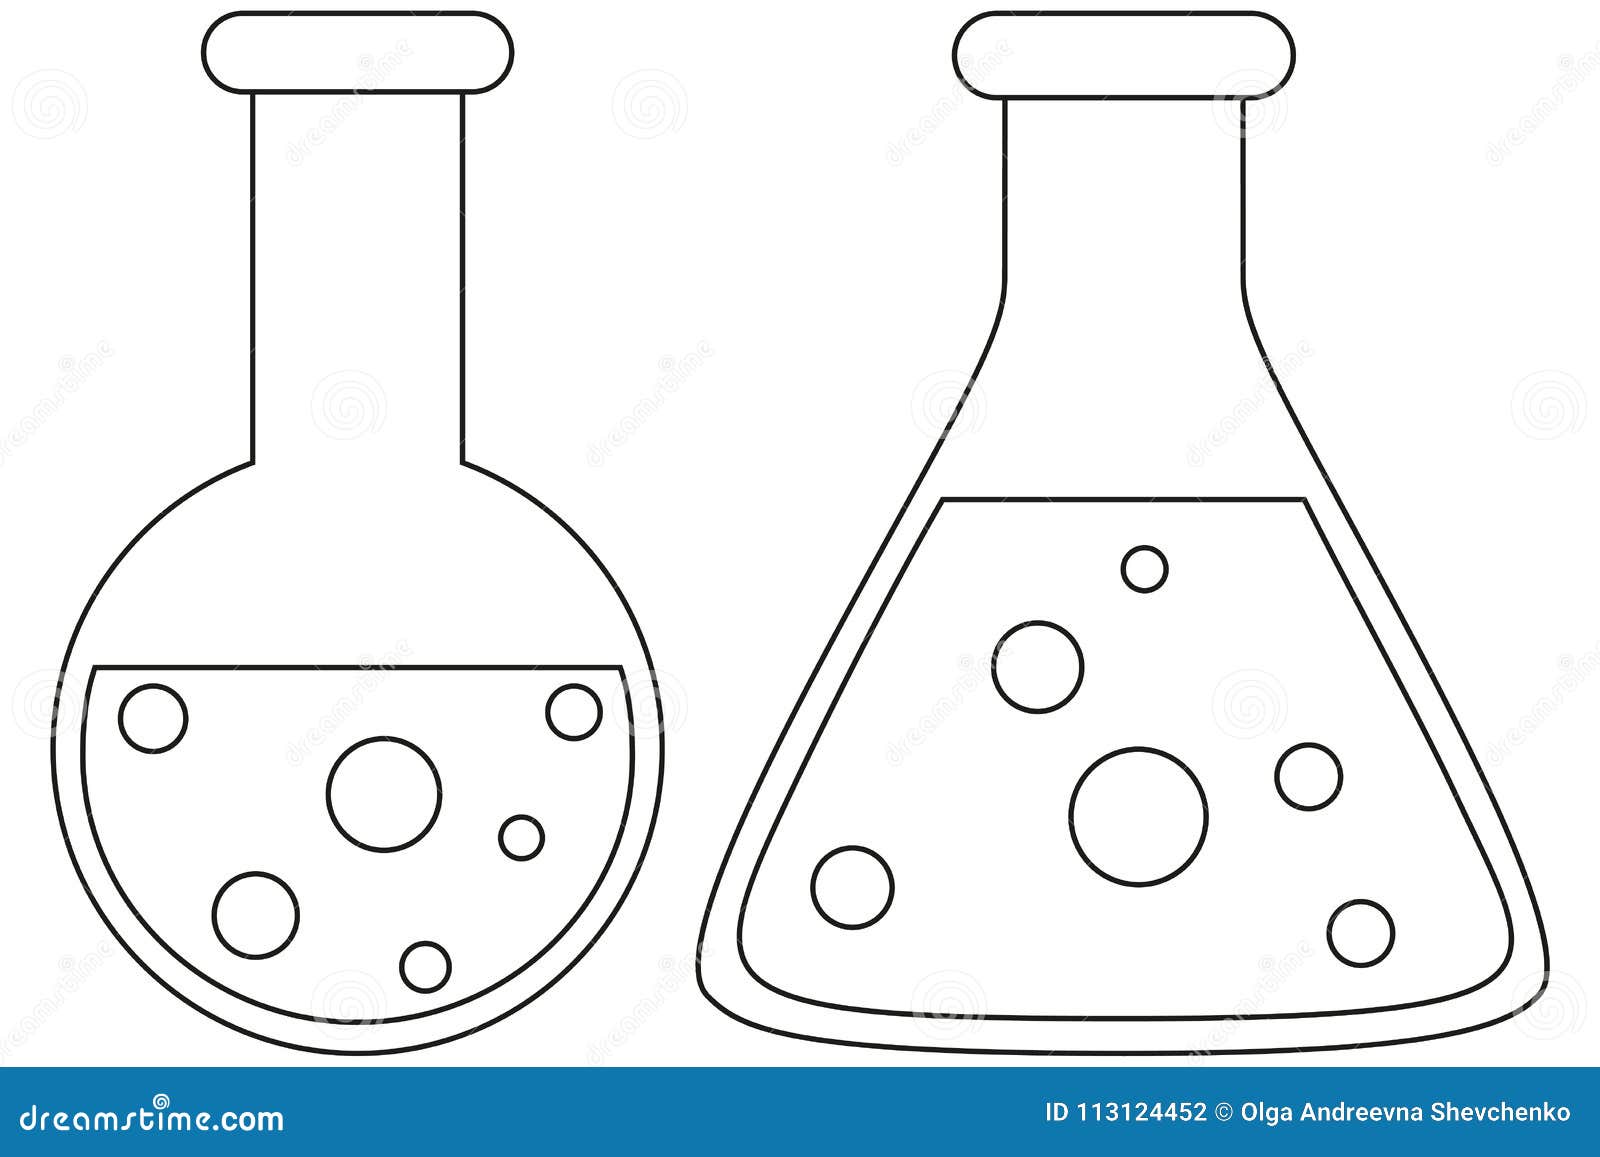 Line Art Black and White Science Test Tube Icon Set. Stock Vector ...